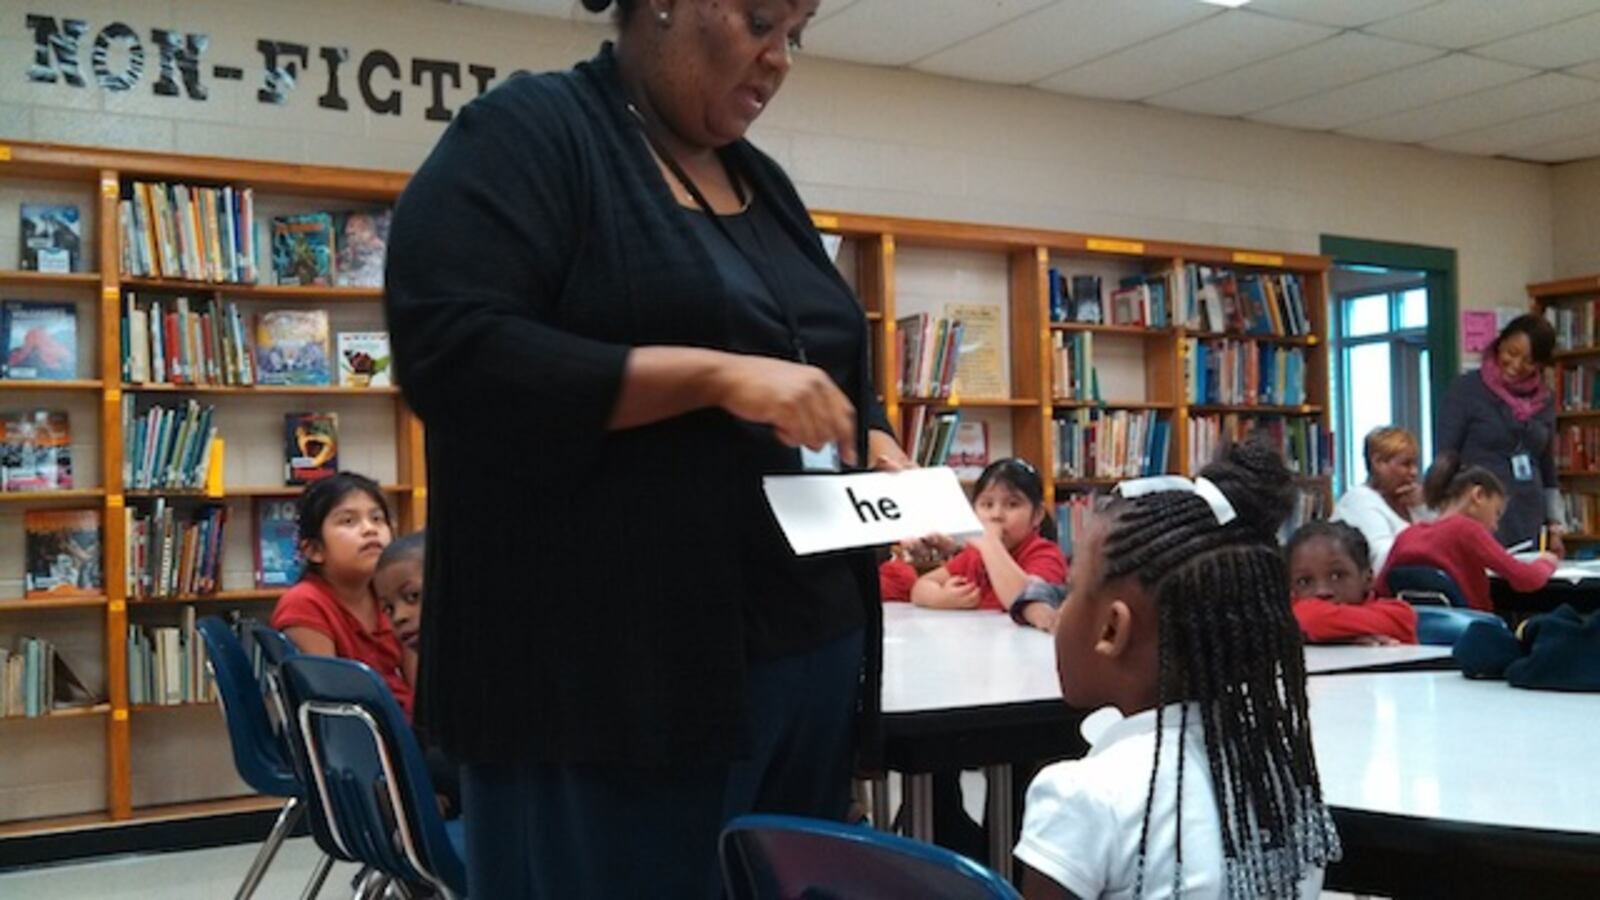 Sharpe Elementary reading interventionist Valencia Ealy works one-on-one with a student on vocabulary words last year in Memphis. Shelby County Schools has started its own program to address lagging literacy scores.